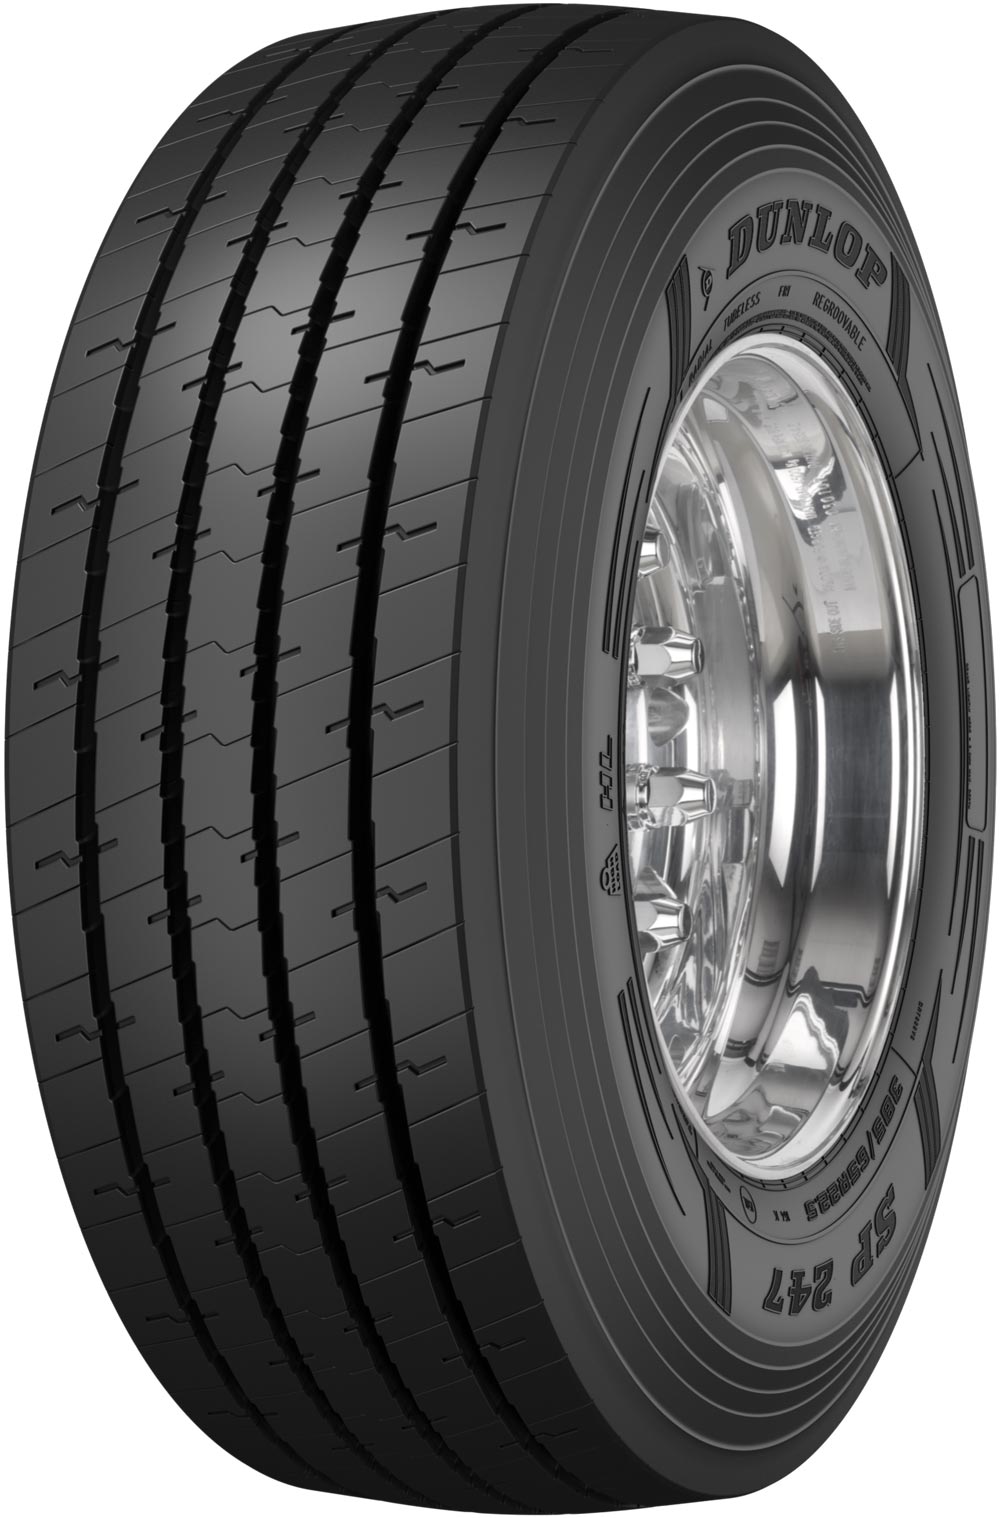 product_type-heavy_tires DUNLOP SP247 385/55 R22.5 K